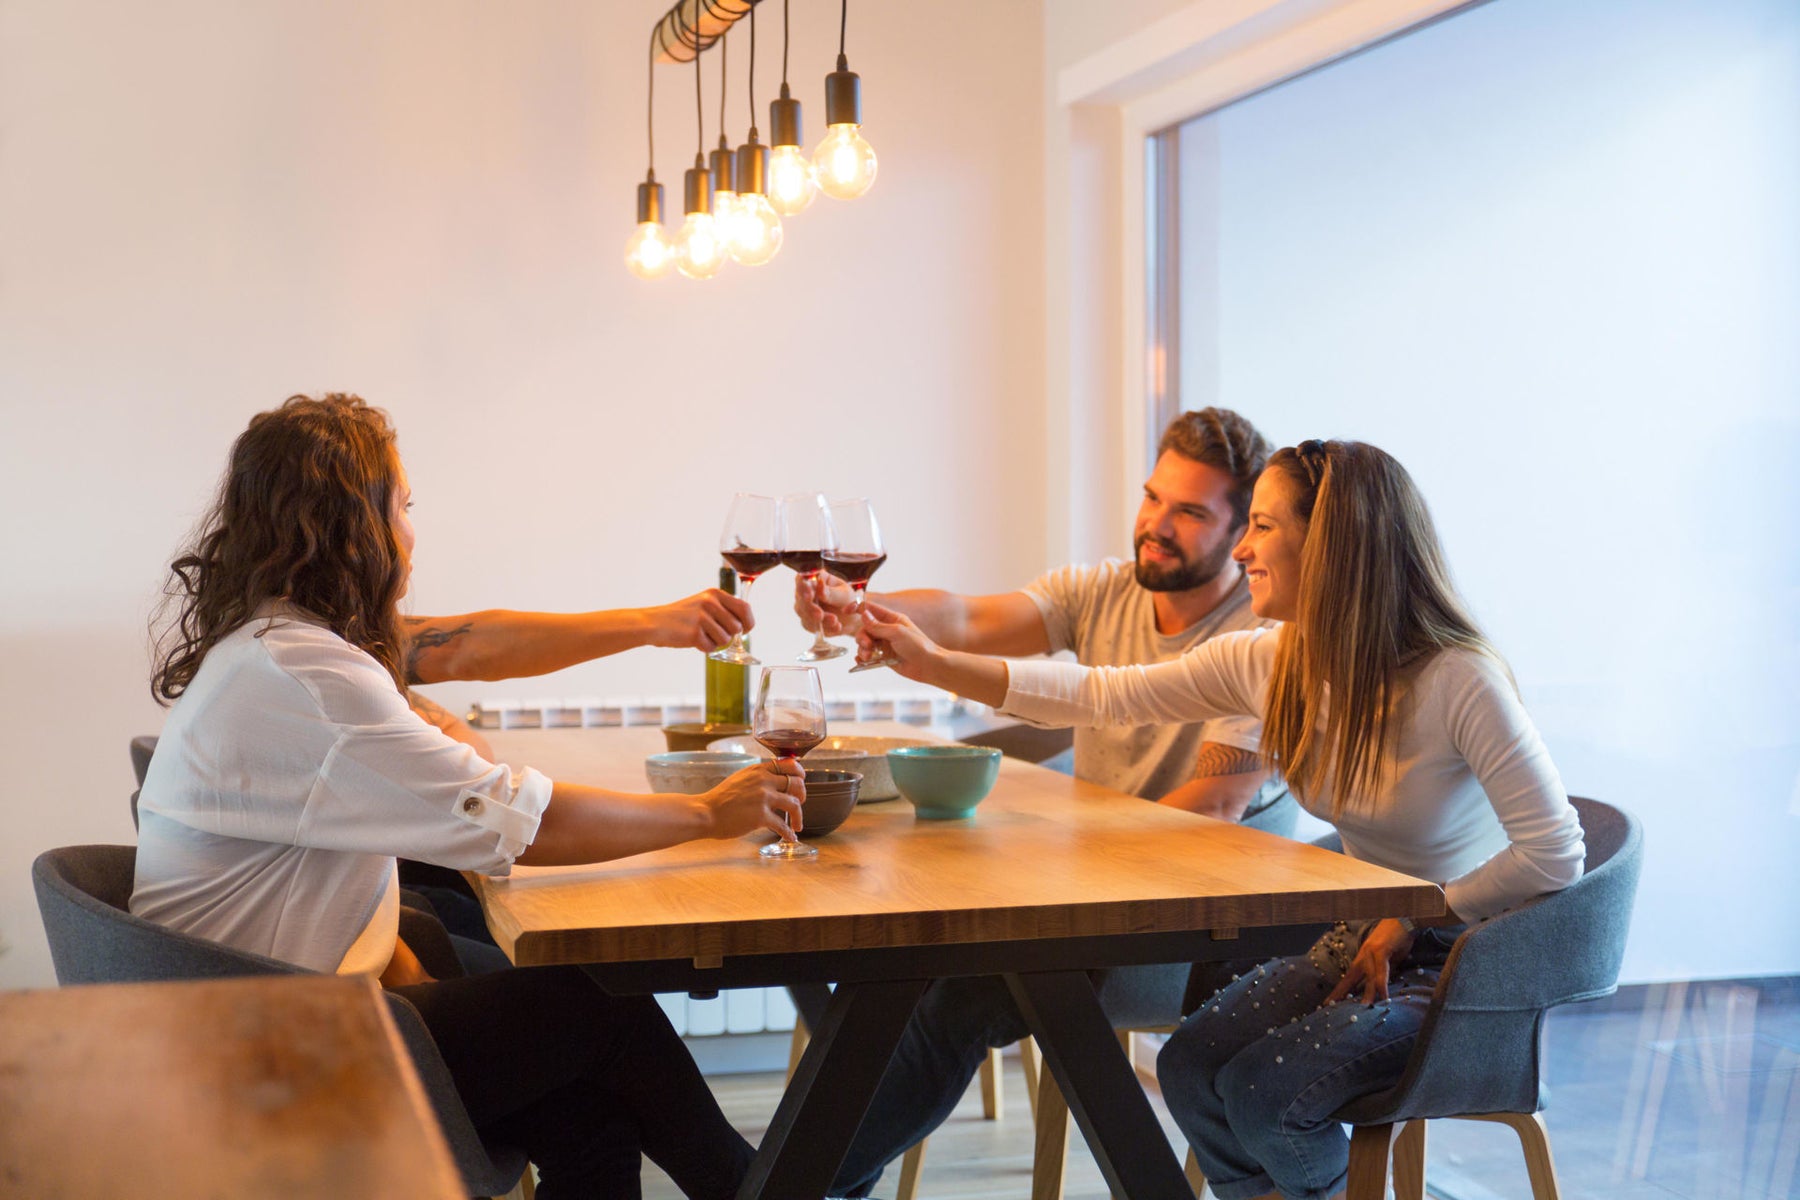 two couples having wine in a kitchen with bright lights